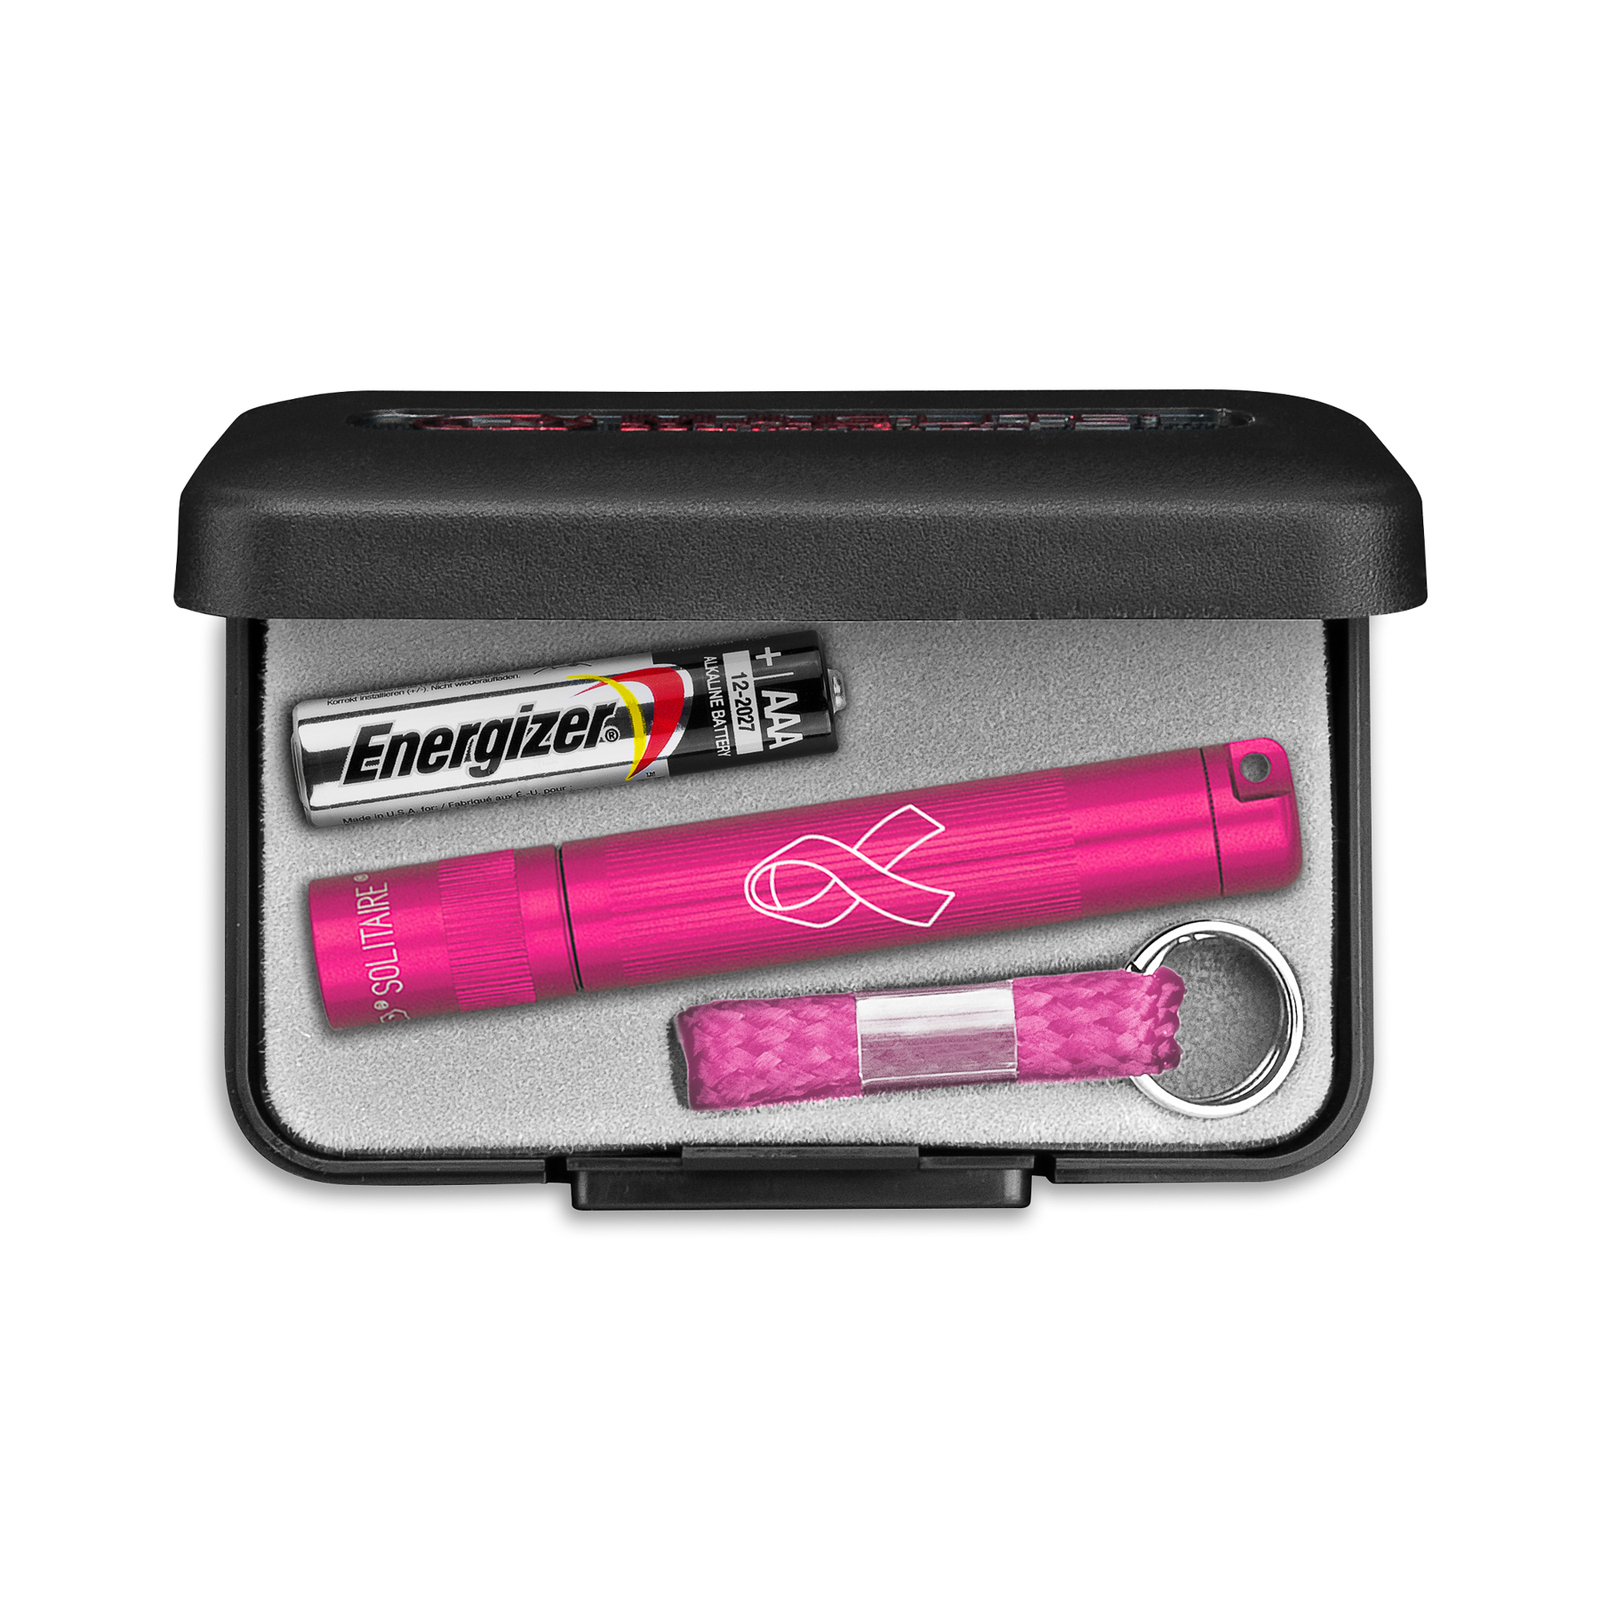 Maglite LED torch Solitaire, 1-Cell AAA, Box, pink